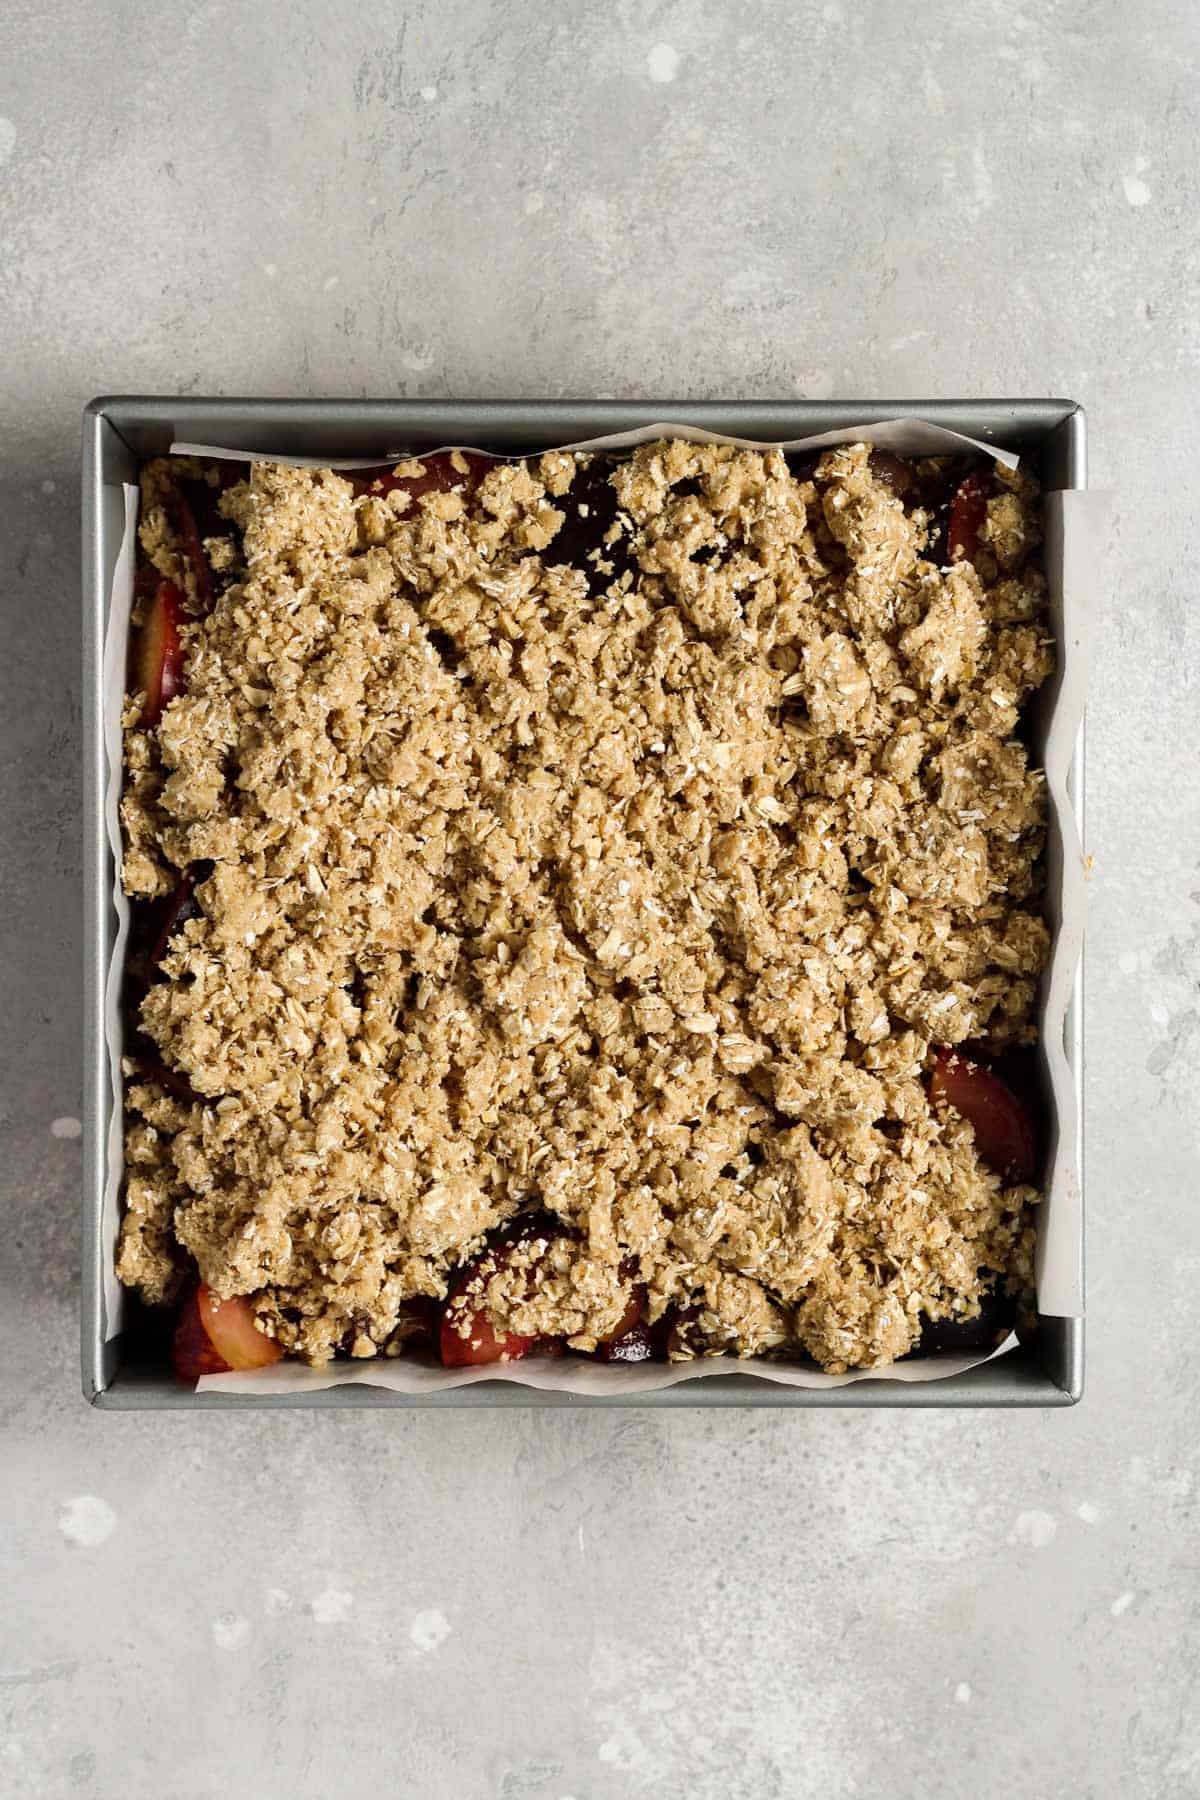 Unbaked plum bars in a 9x9 square baking pan.